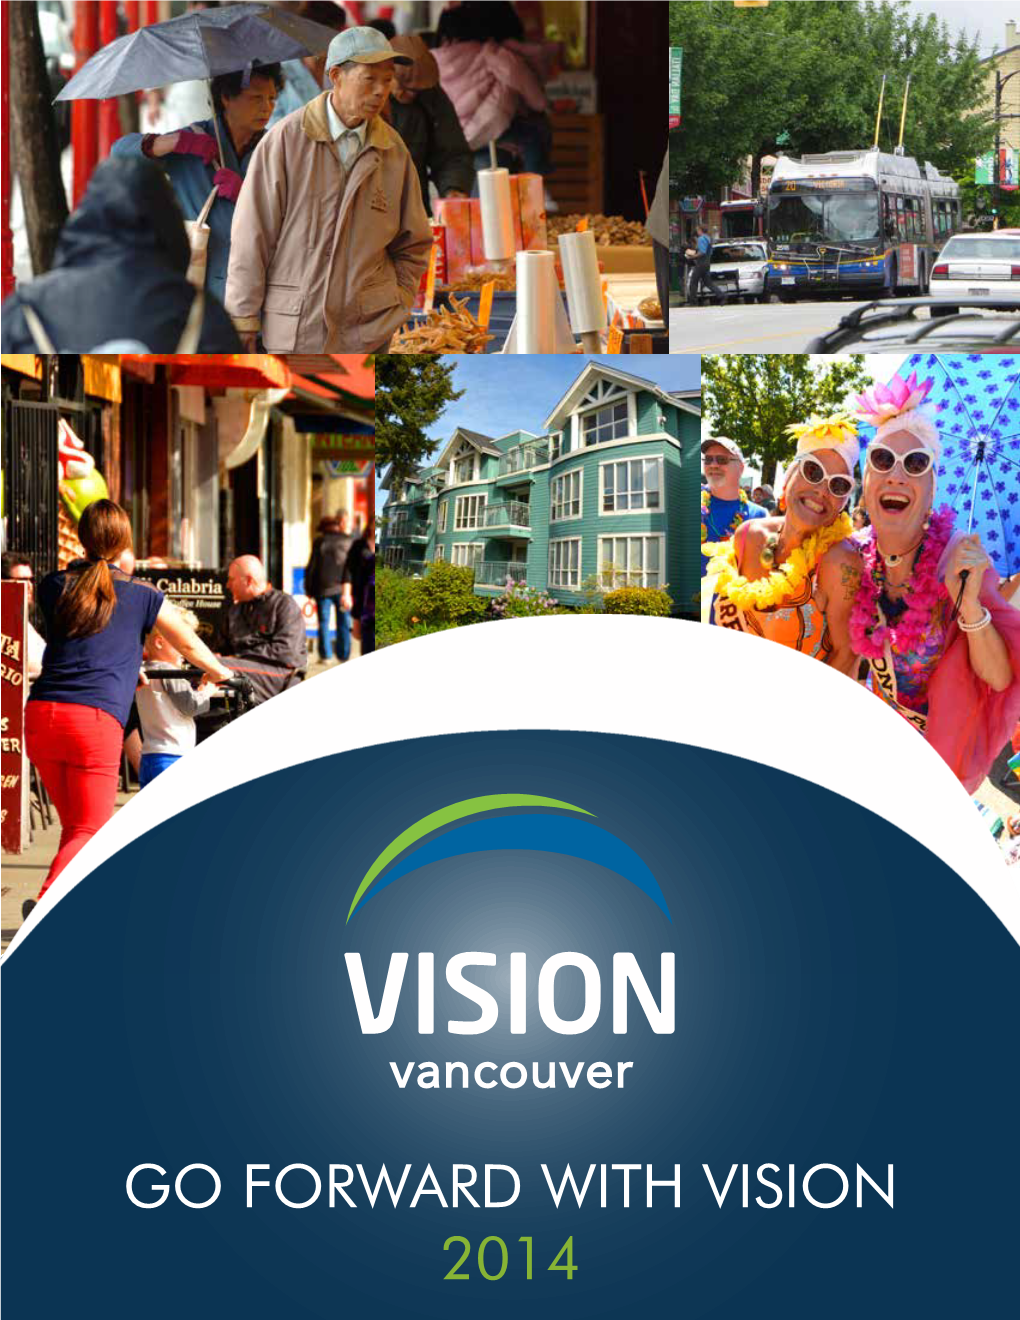 Go Forward with Vision 2014 a Message from Gregor Robertson